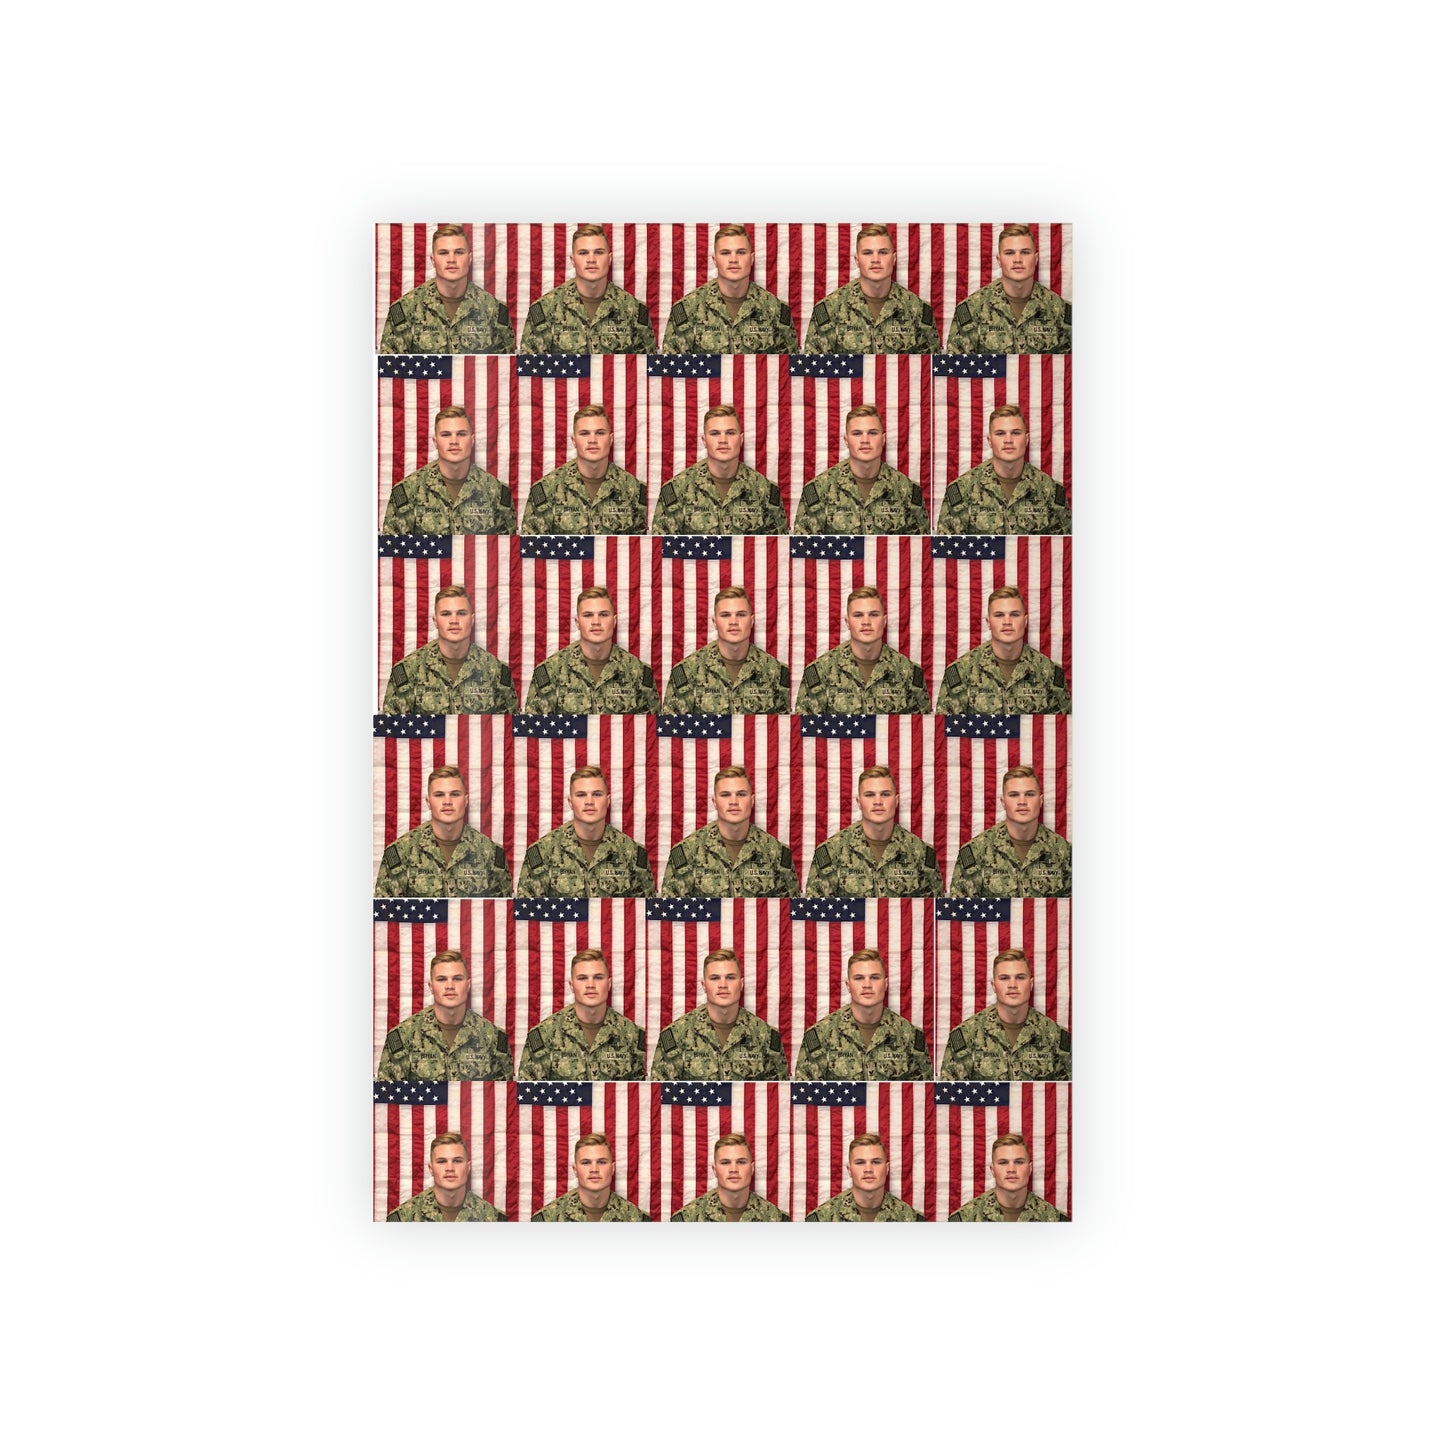 Zach Bryan Wrapping Paper | Christmas Wrapping Paper | Zach Bryan Gift Idea | Country Music Gift | Zach Bryan Merch | Holiday Gift paper